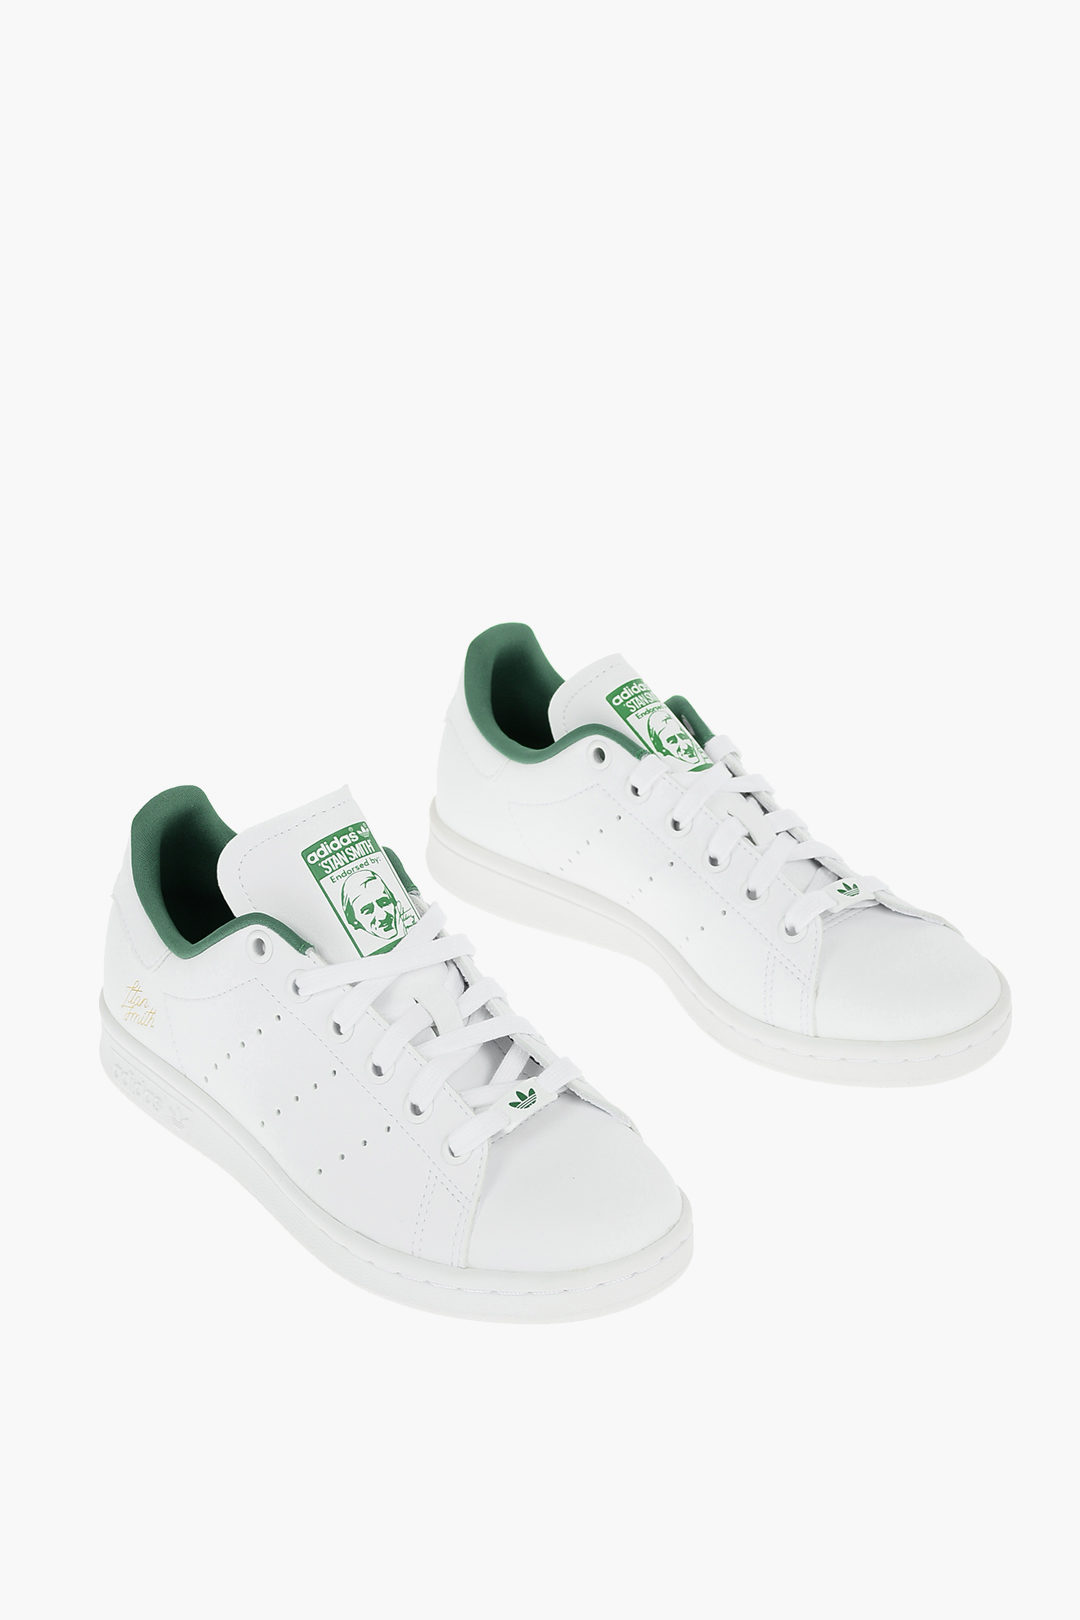 Adidas Faux Leather STAN With Perforated Details unisex men women - Outlet